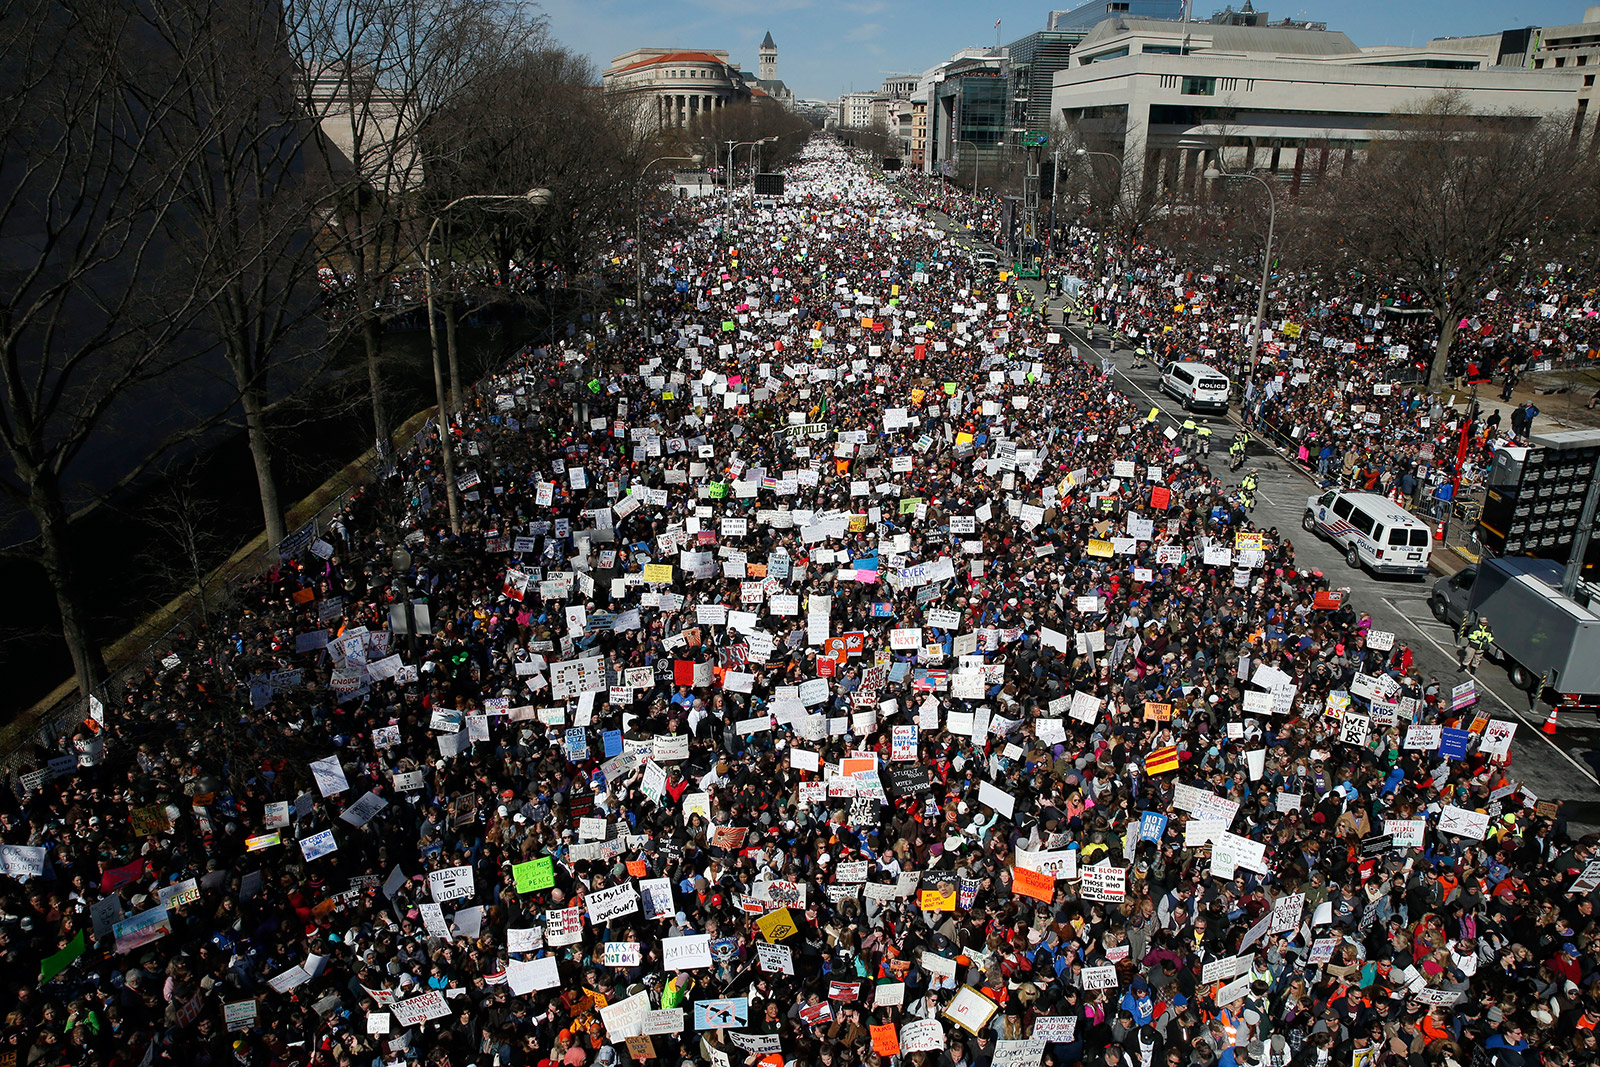 In pictures: The March for Our Lives protests1600 x 1067